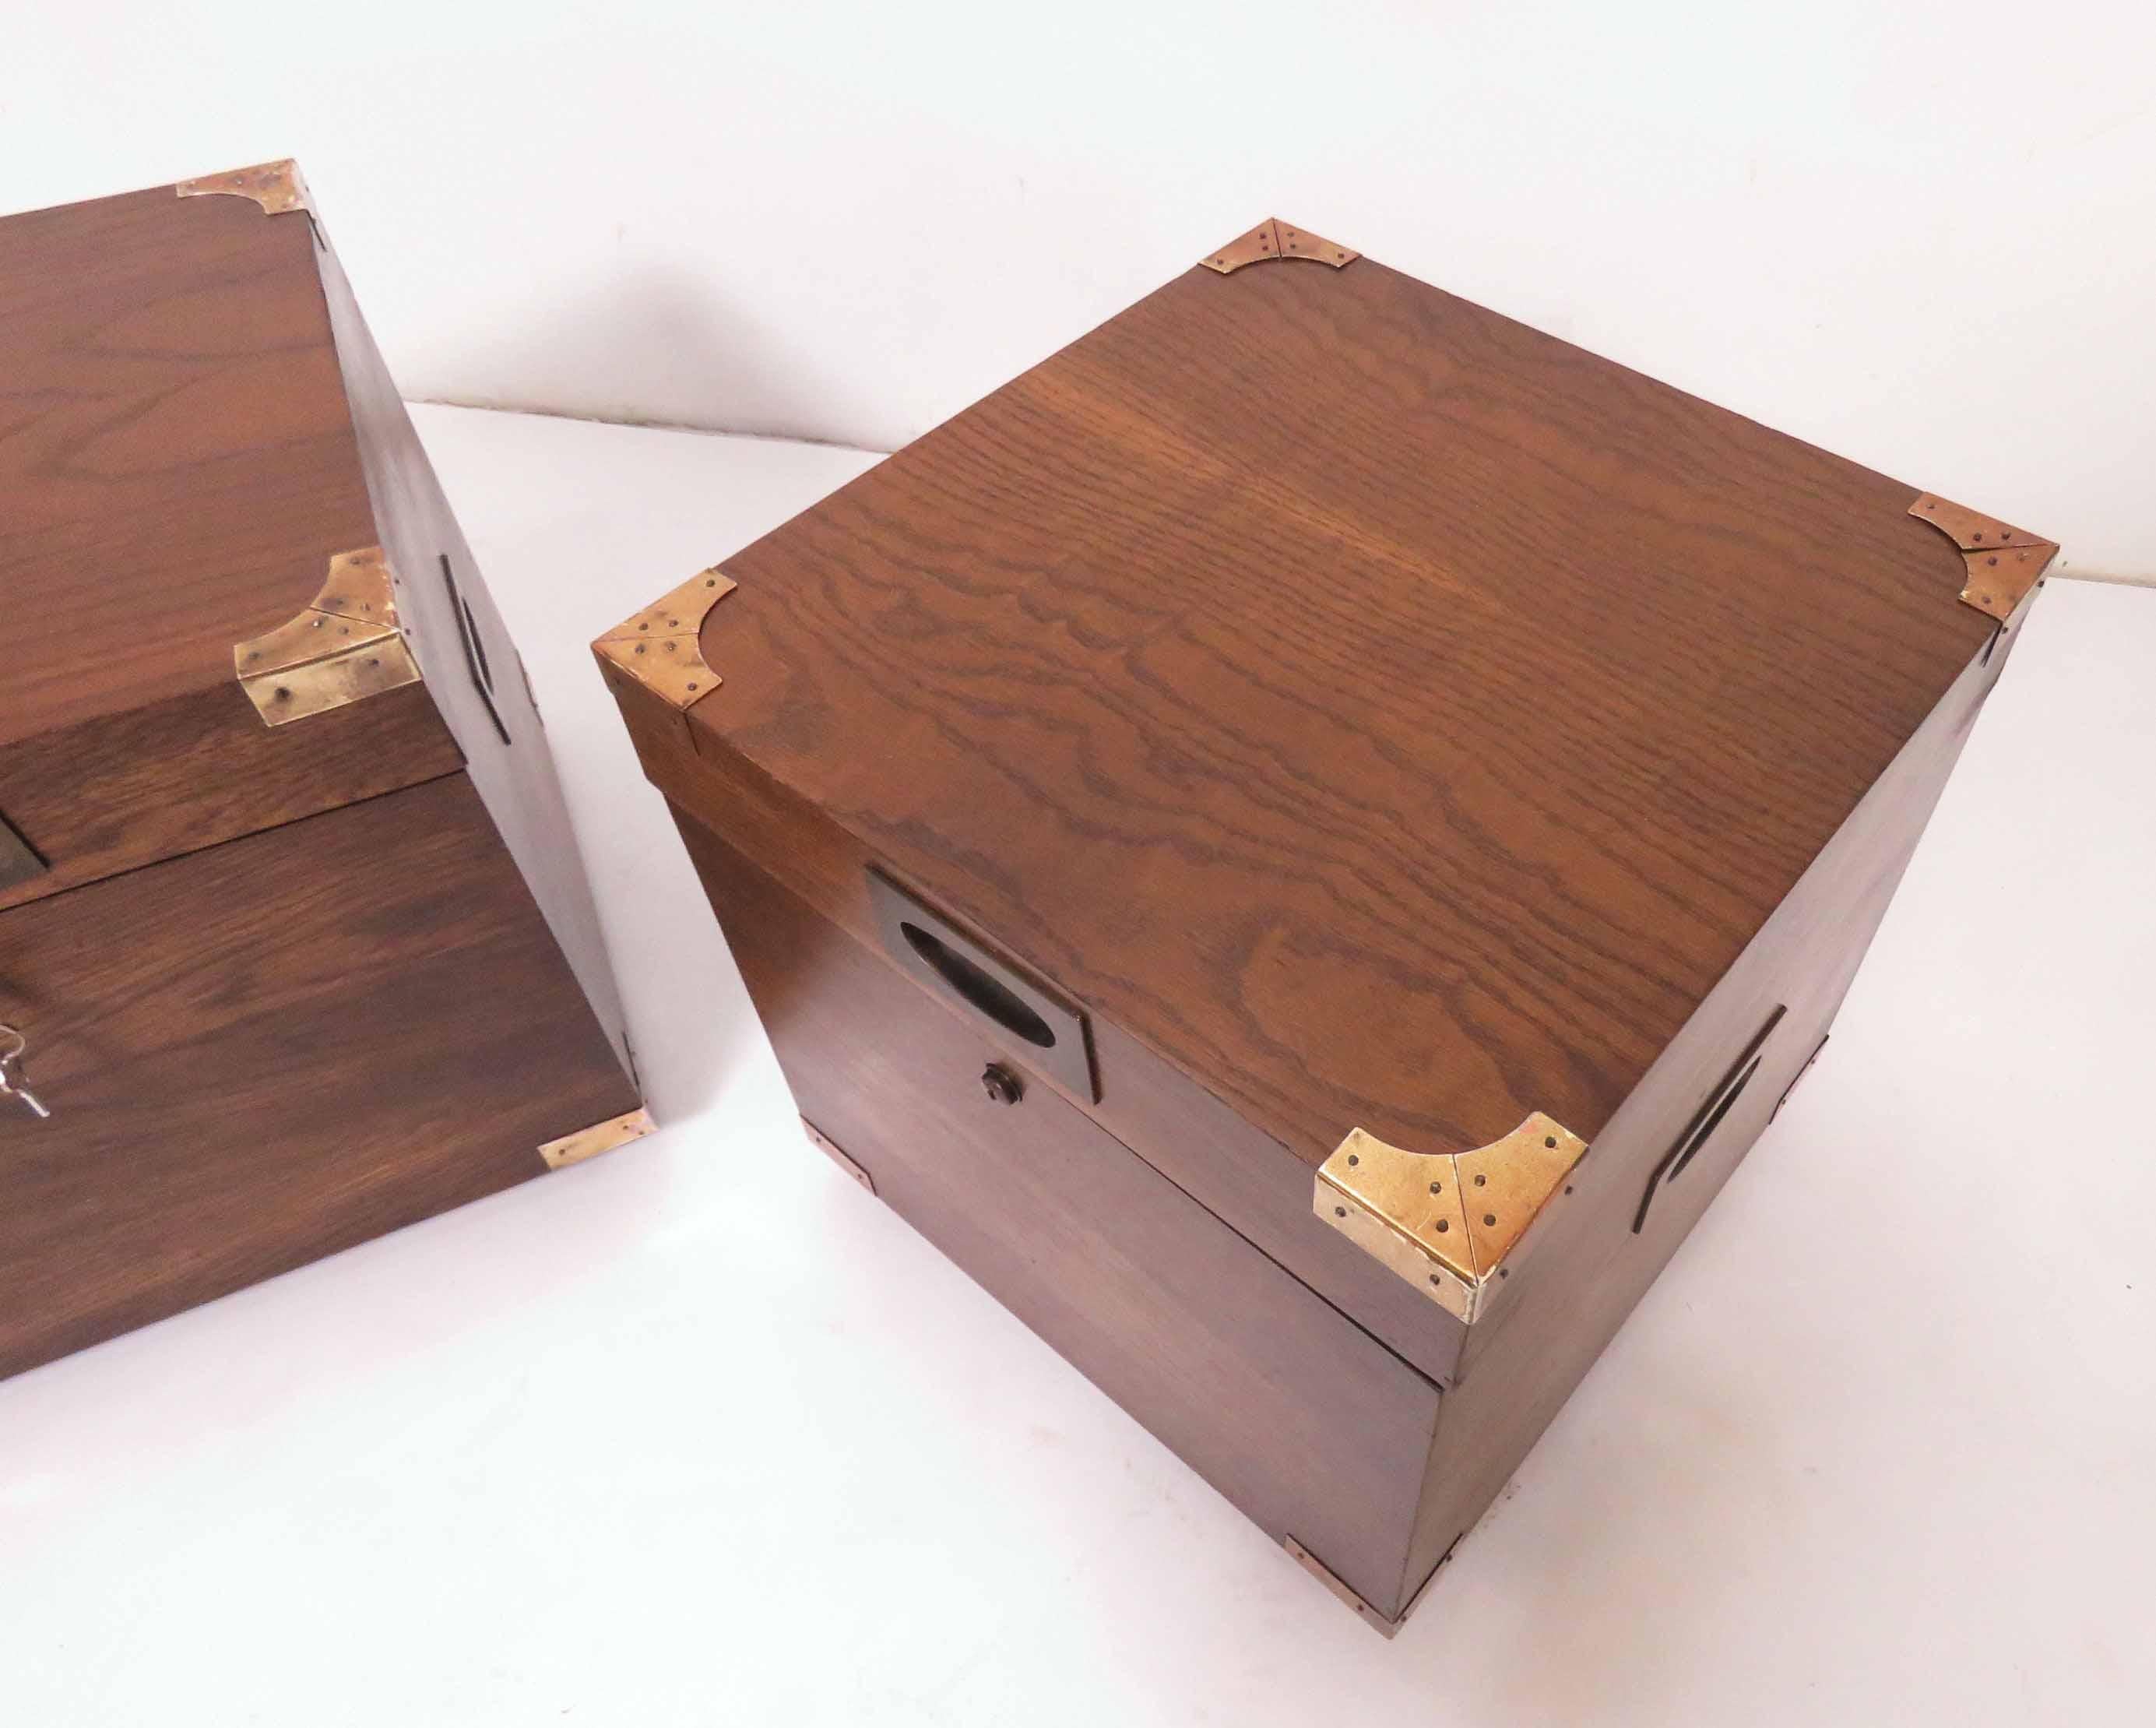 American Pair of Midcentury Campaign Style Cube Form Chests by Lane Furniture